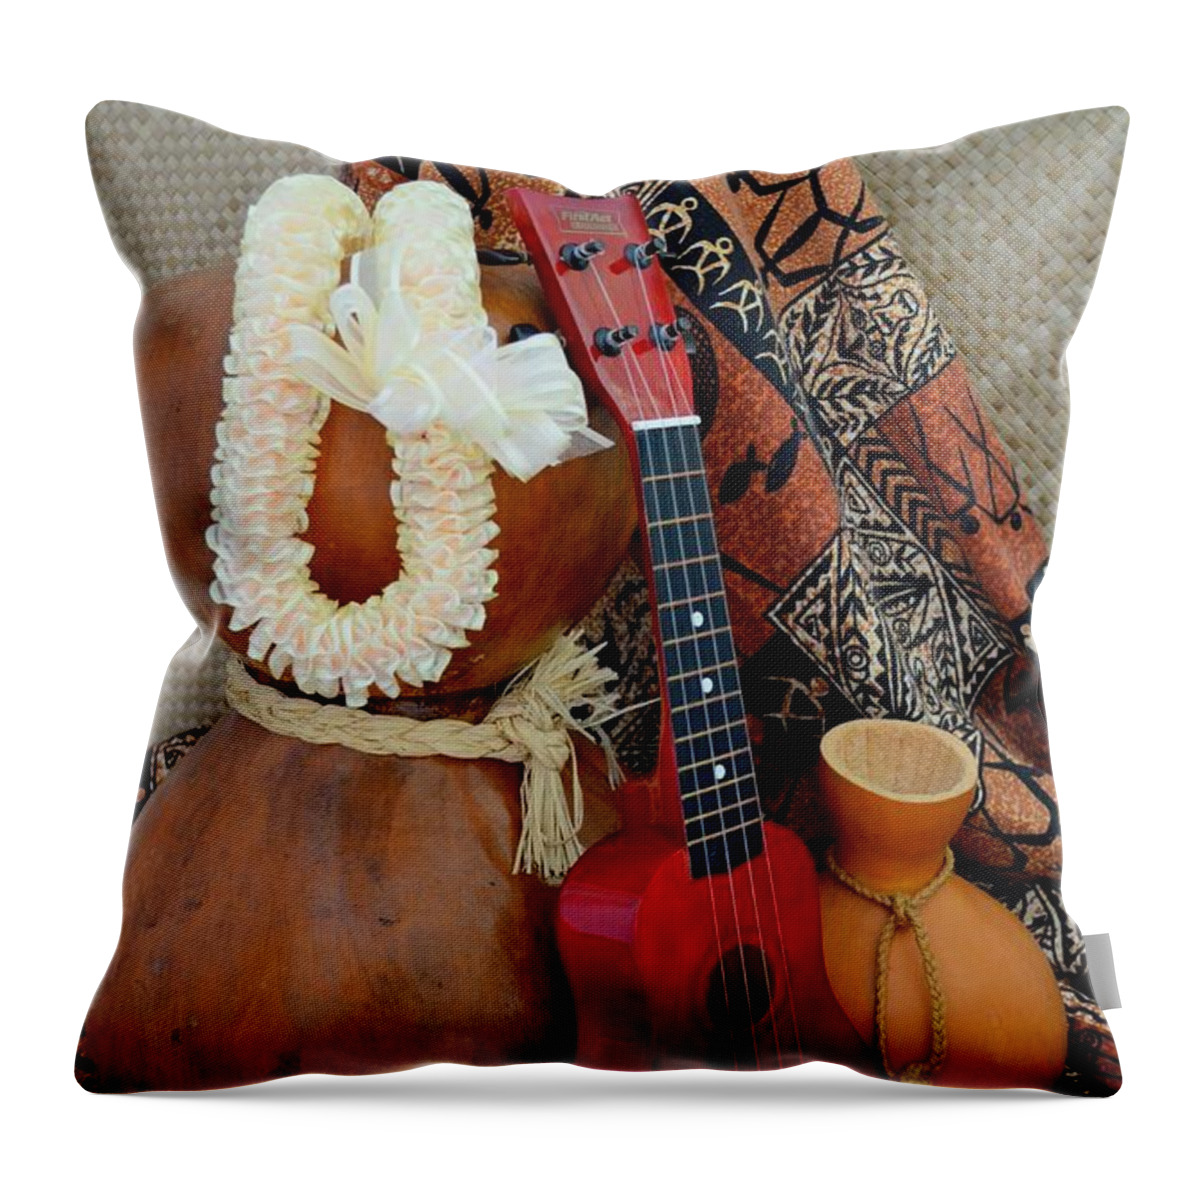 Ipu Heke Throw Pillow featuring the photograph Ipu Heke and Red Ukulele with White Satin Lei by Mary Deal